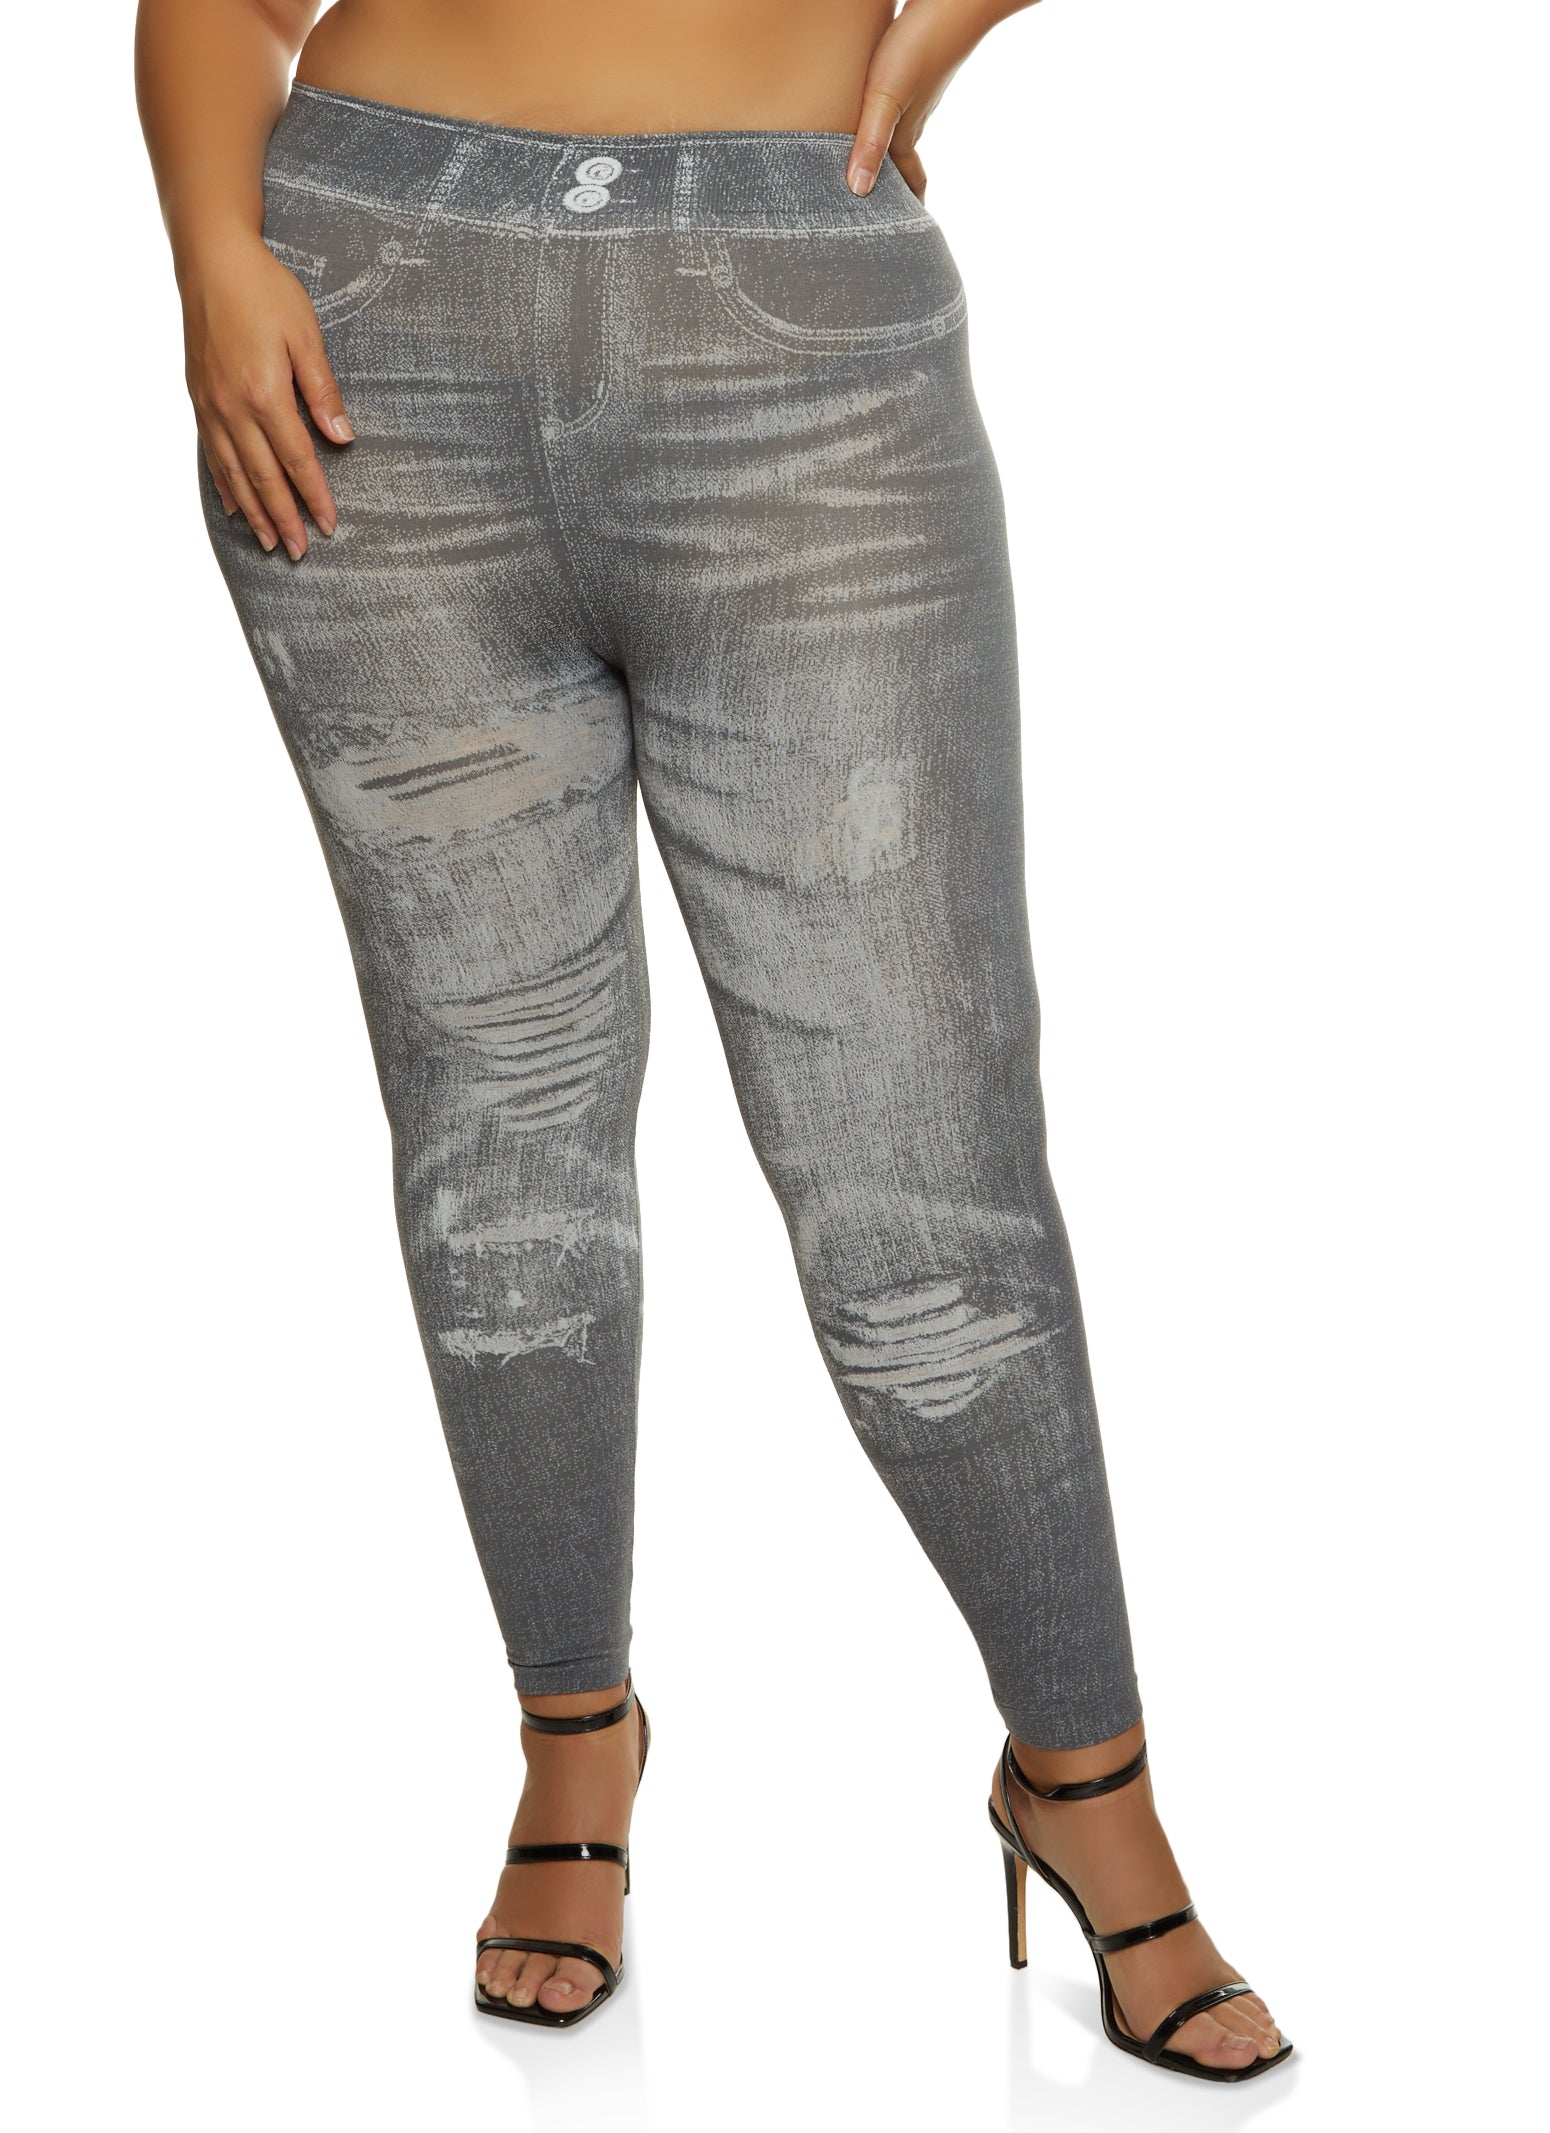 Plus Size Whiskered Print Jeggings - Gray